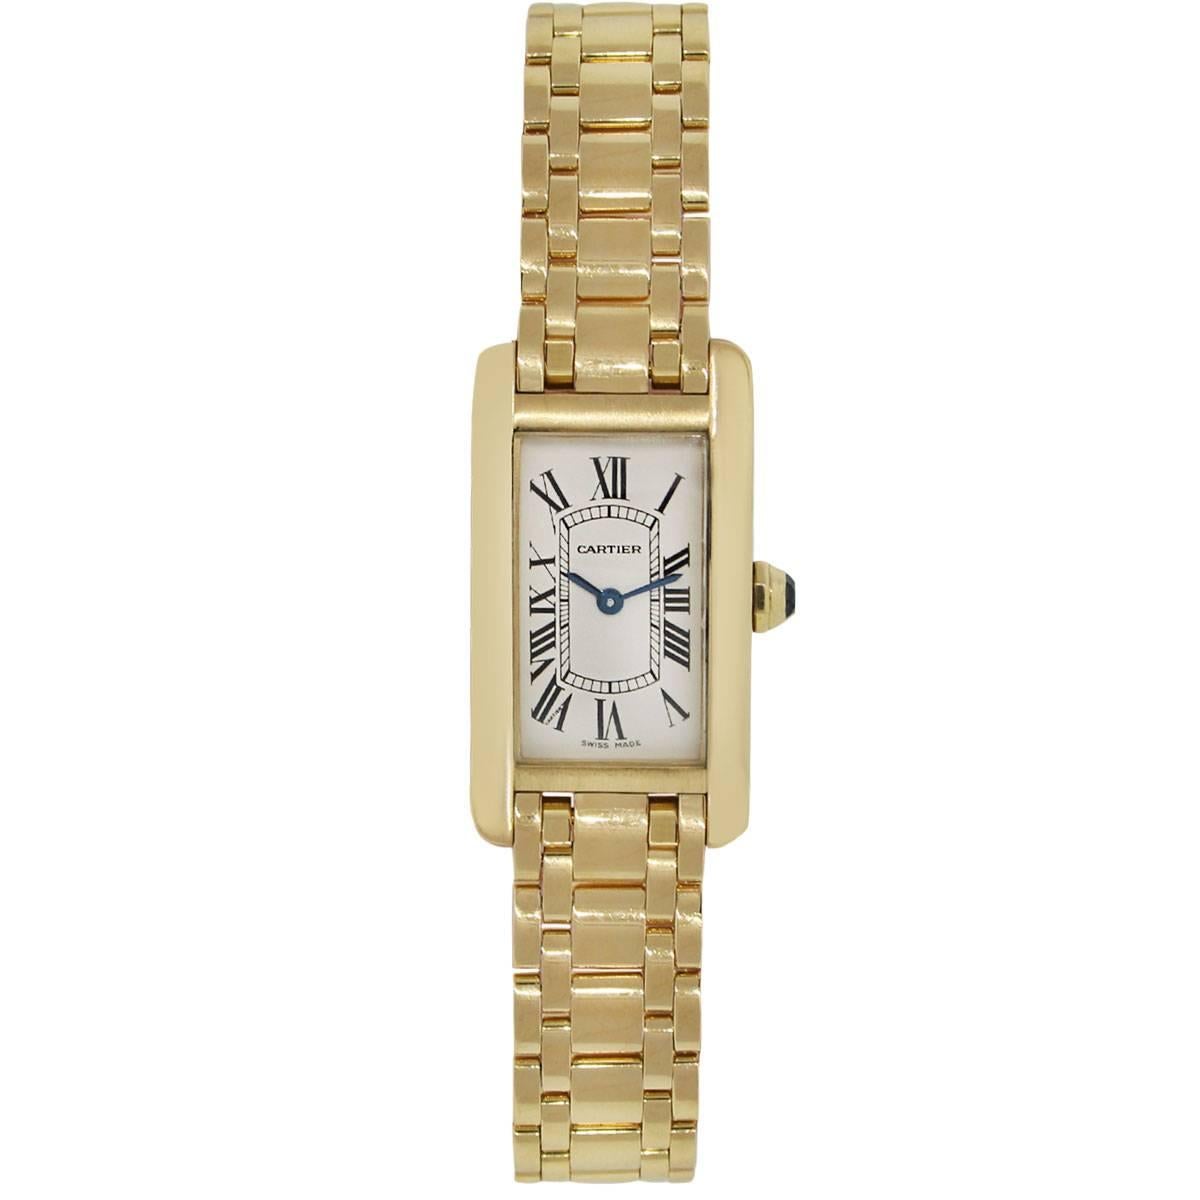 Brand: Cartier
MPN: W26015K2
Model: Americaine Tank
Case Material: 18k Yellow Gold
Case Measurements: 19mm
Bezel: 18k yellow gold smooth fixed bezel
Dial: White dial with black roman numerals and blue steel hands
Bracelet: 18k Yellow Gold